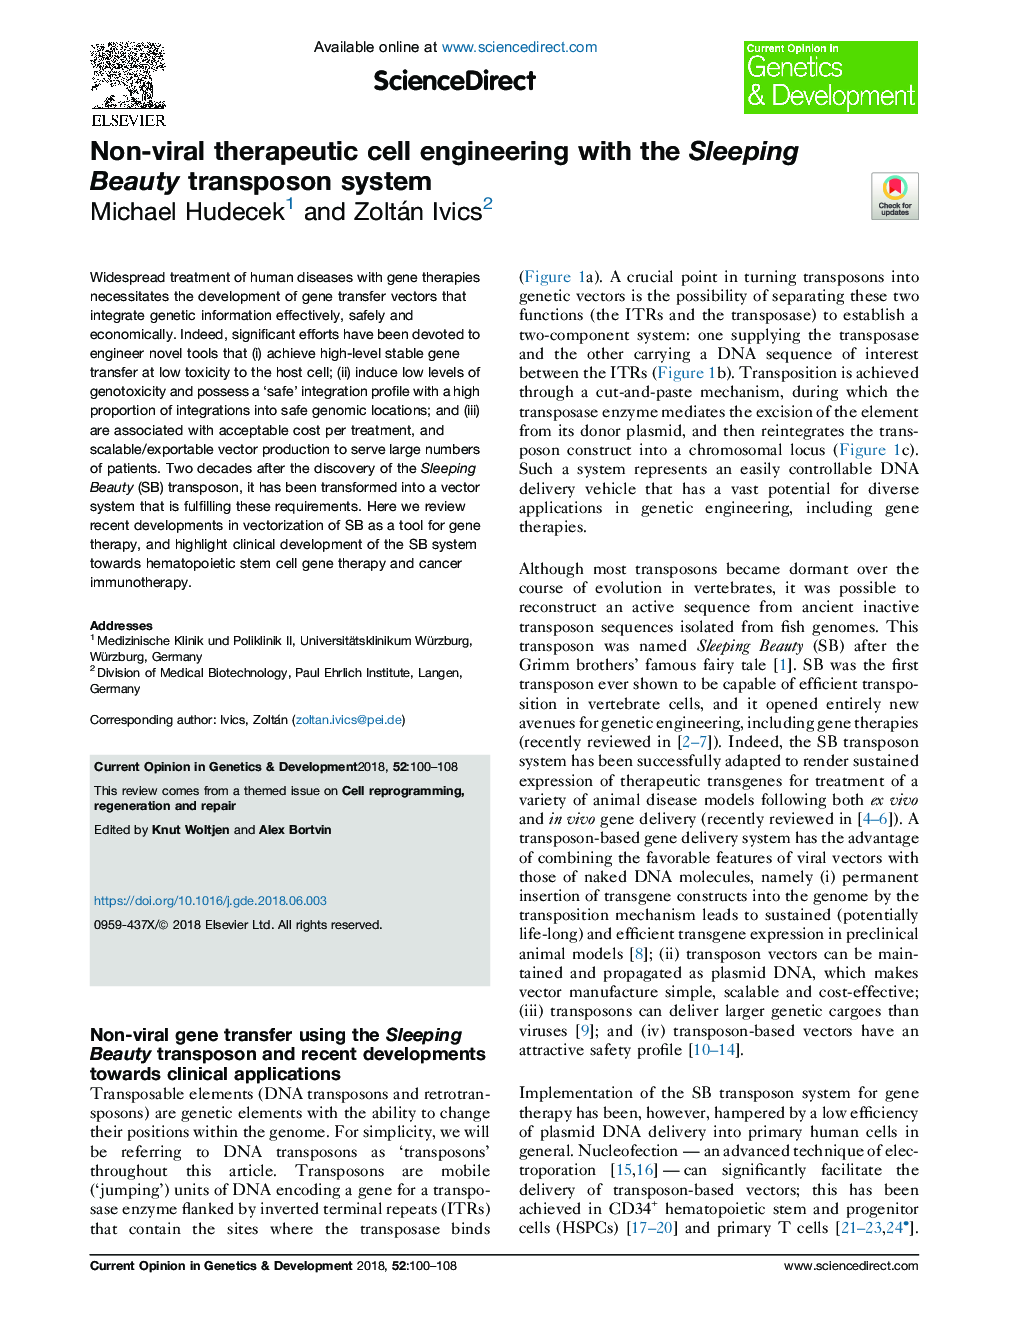 Non-viral therapeutic cell engineering with the Sleeping Beauty transposon system